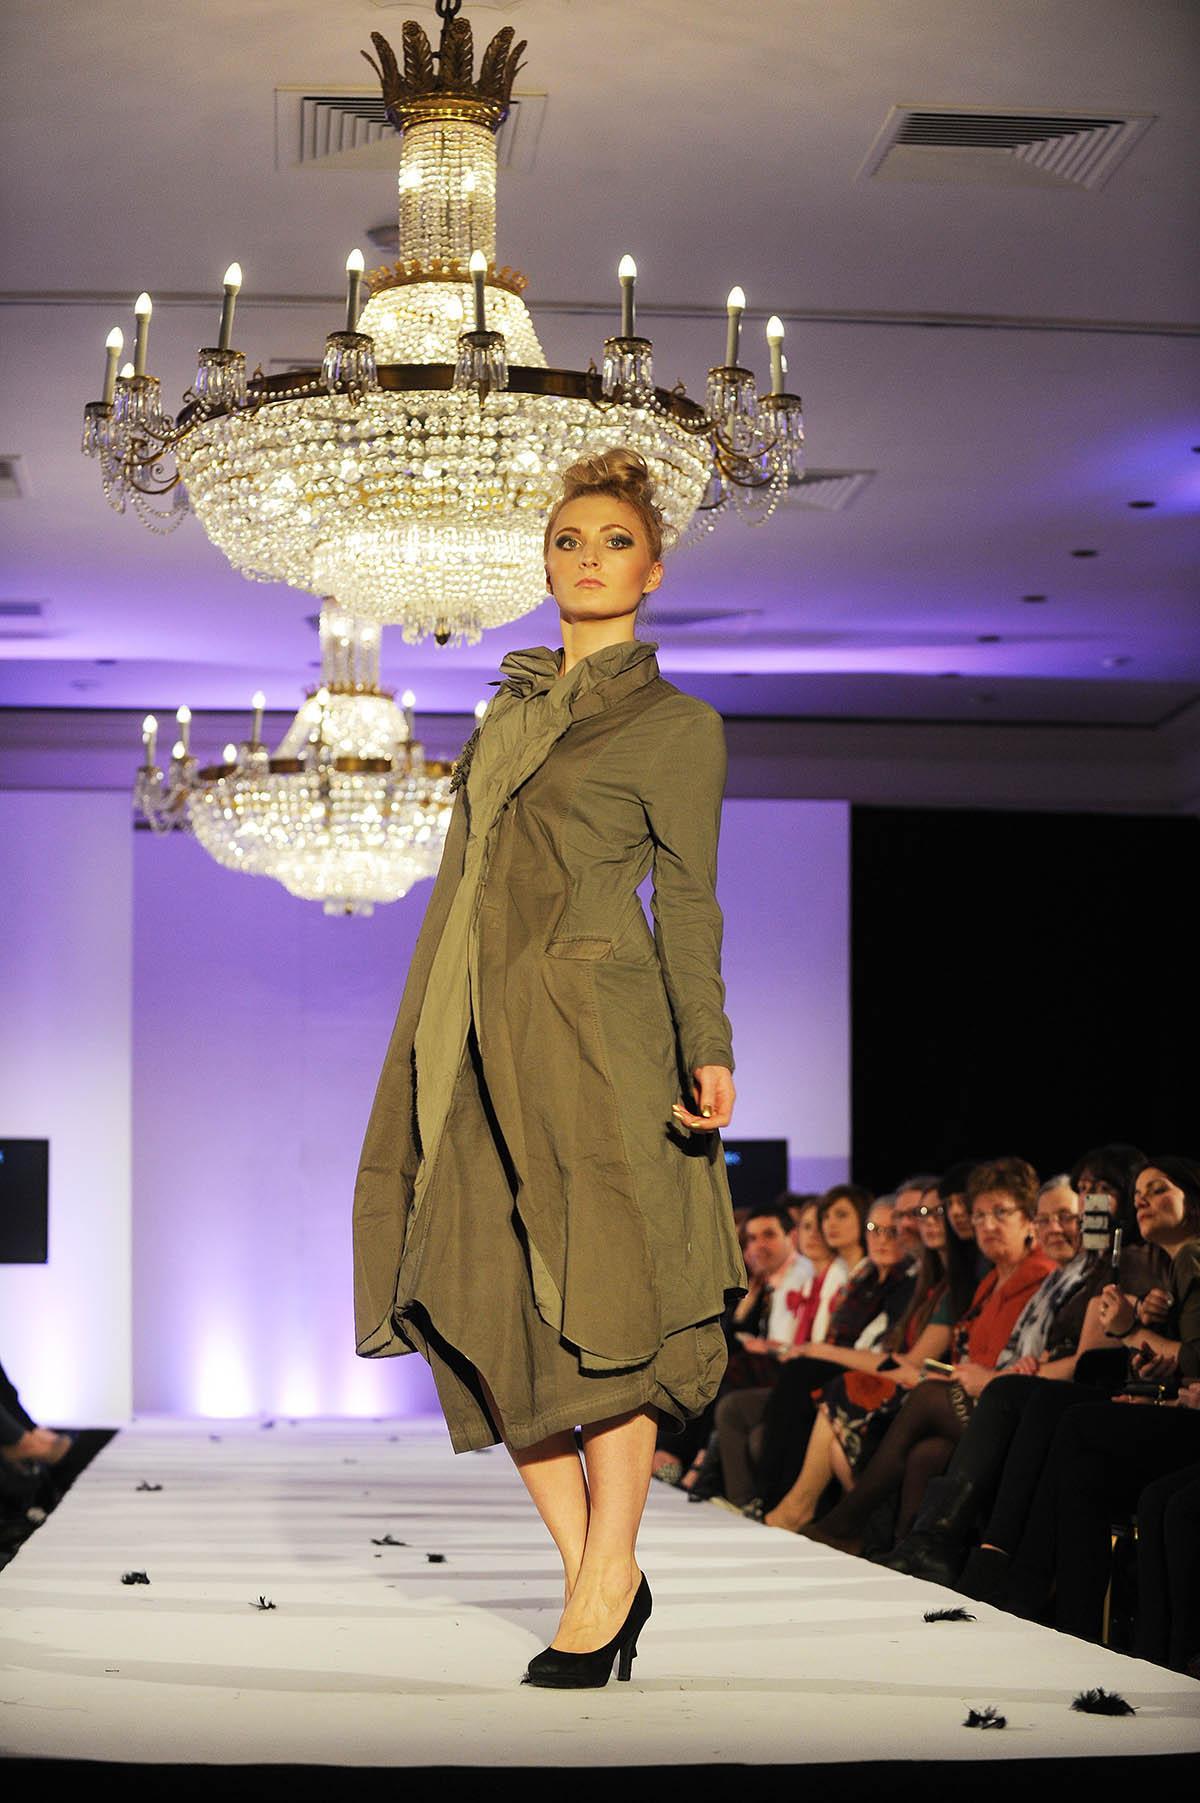 Pictures from Oxford Fashion Week's opening runway event, the Cosmopolitan Show in the Randolph Hotel Ballroom.
